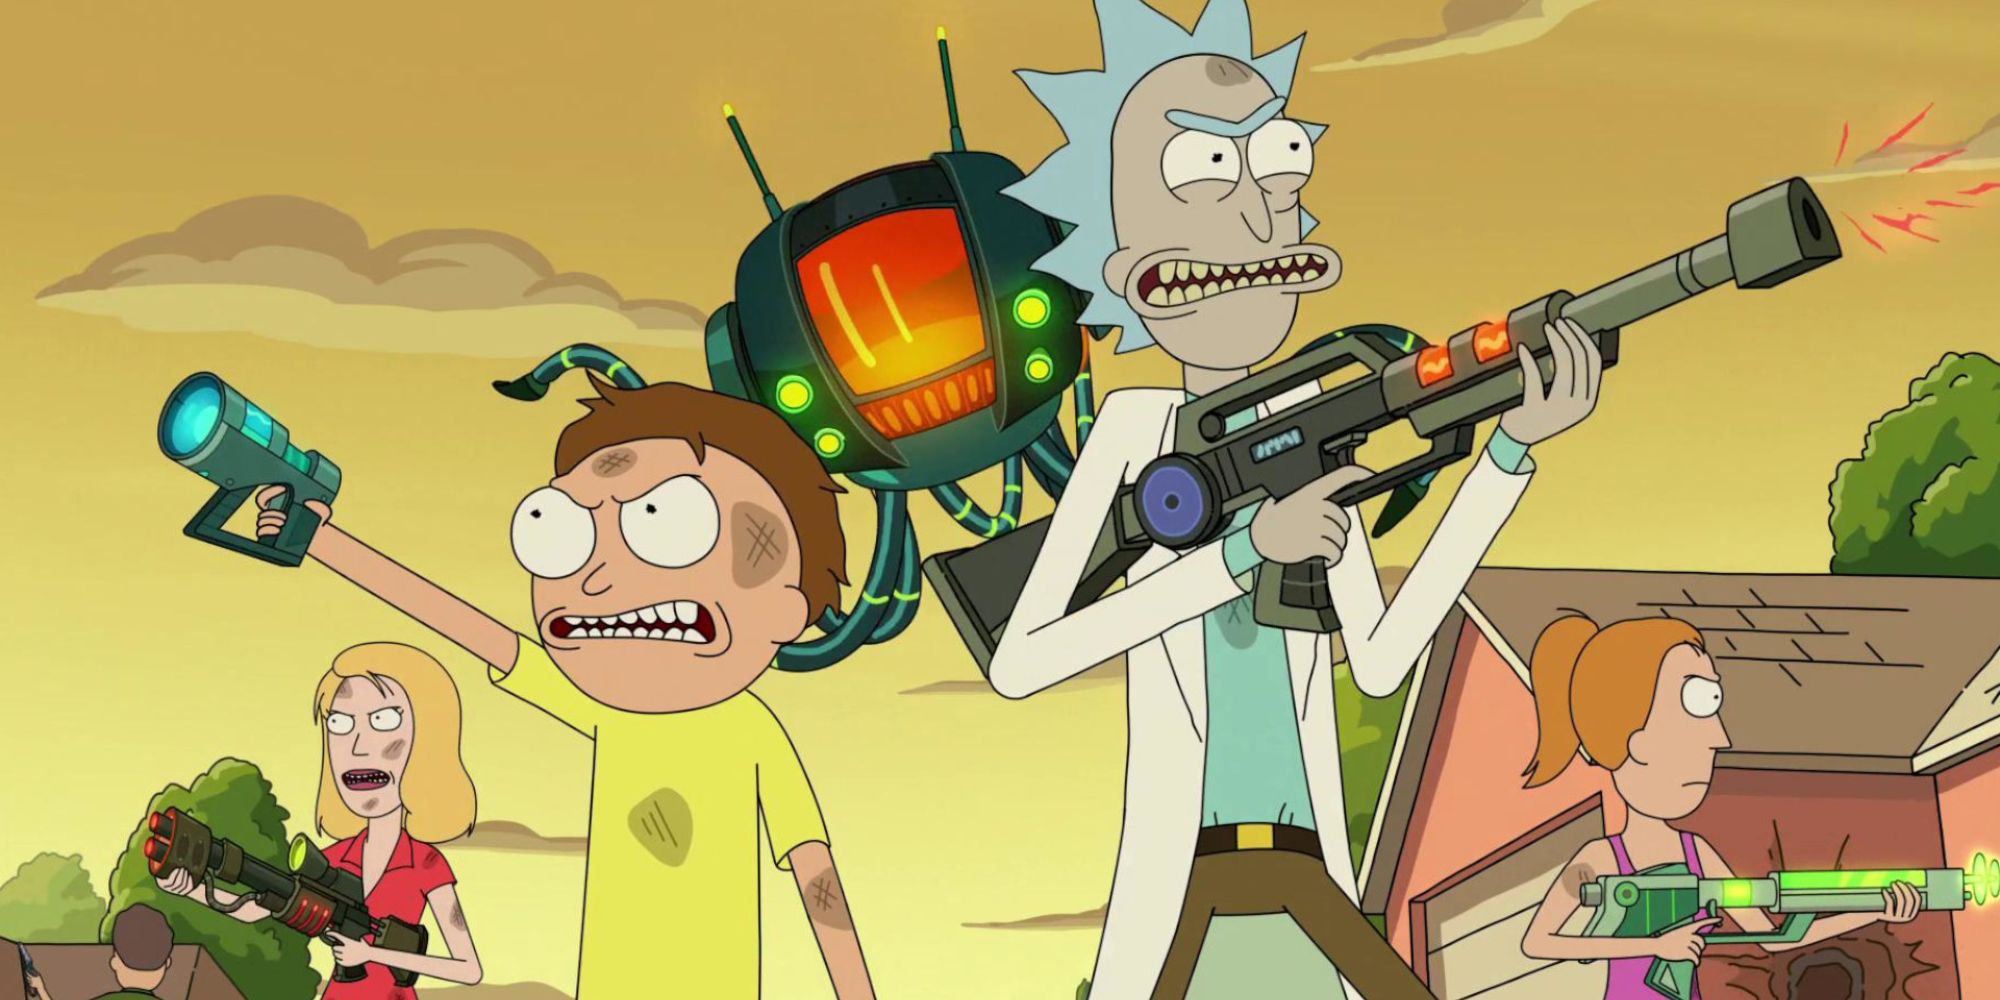 Rick and Morty with weapons standing in front of a robot